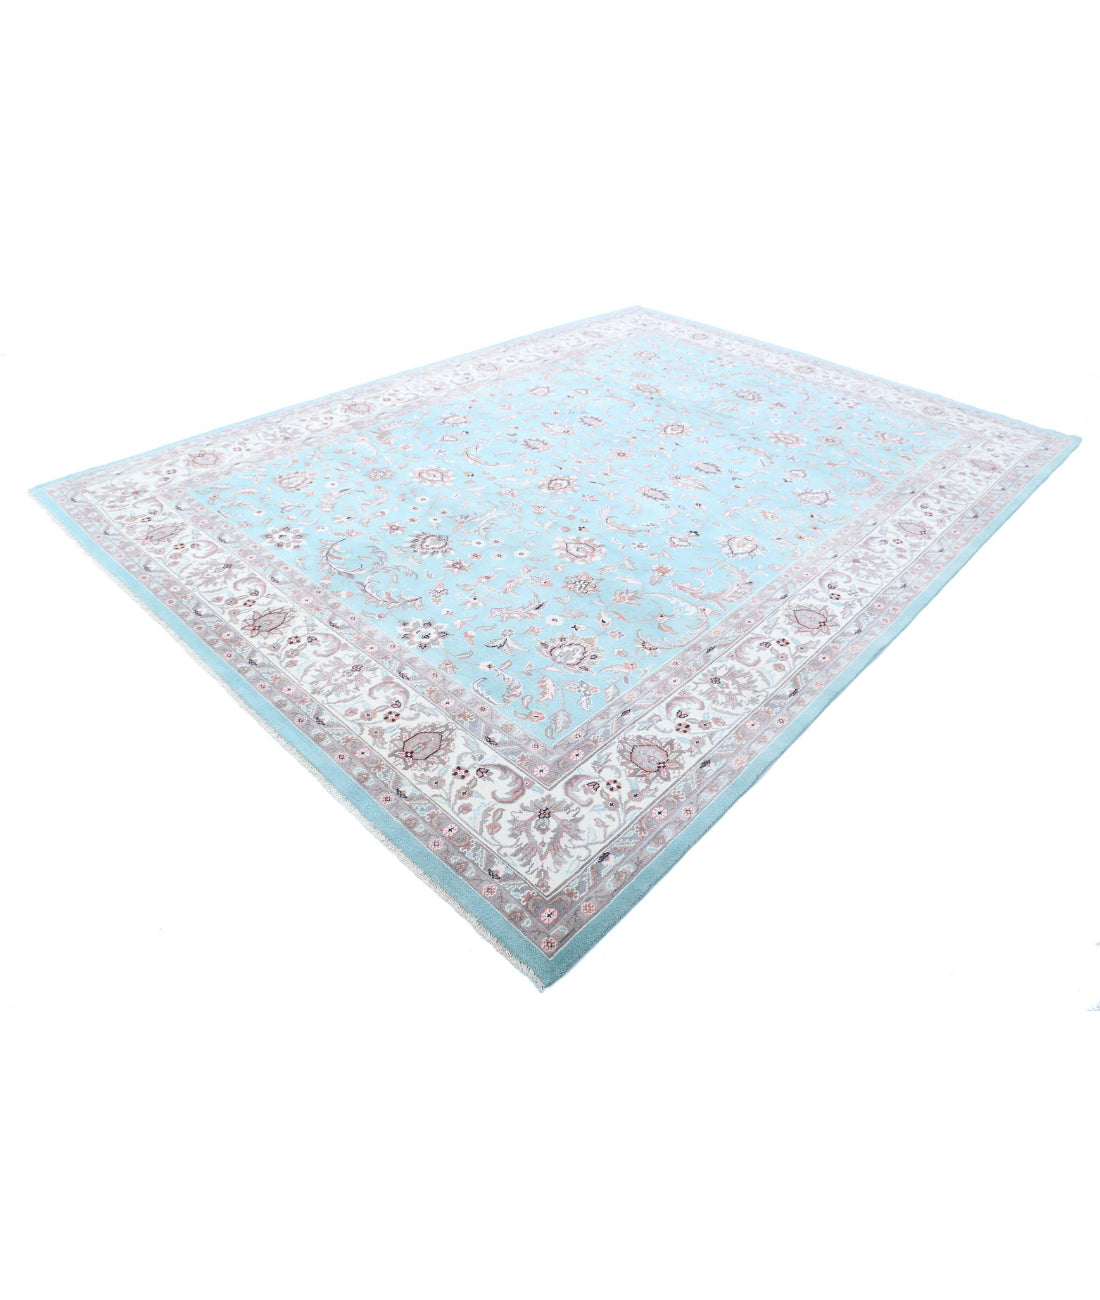 Heritage 8'10'' X 12'0'' Hand-Knotted Wool Rug 8'10'' x 12'0'' (265 X 360) / Blue / Ivory